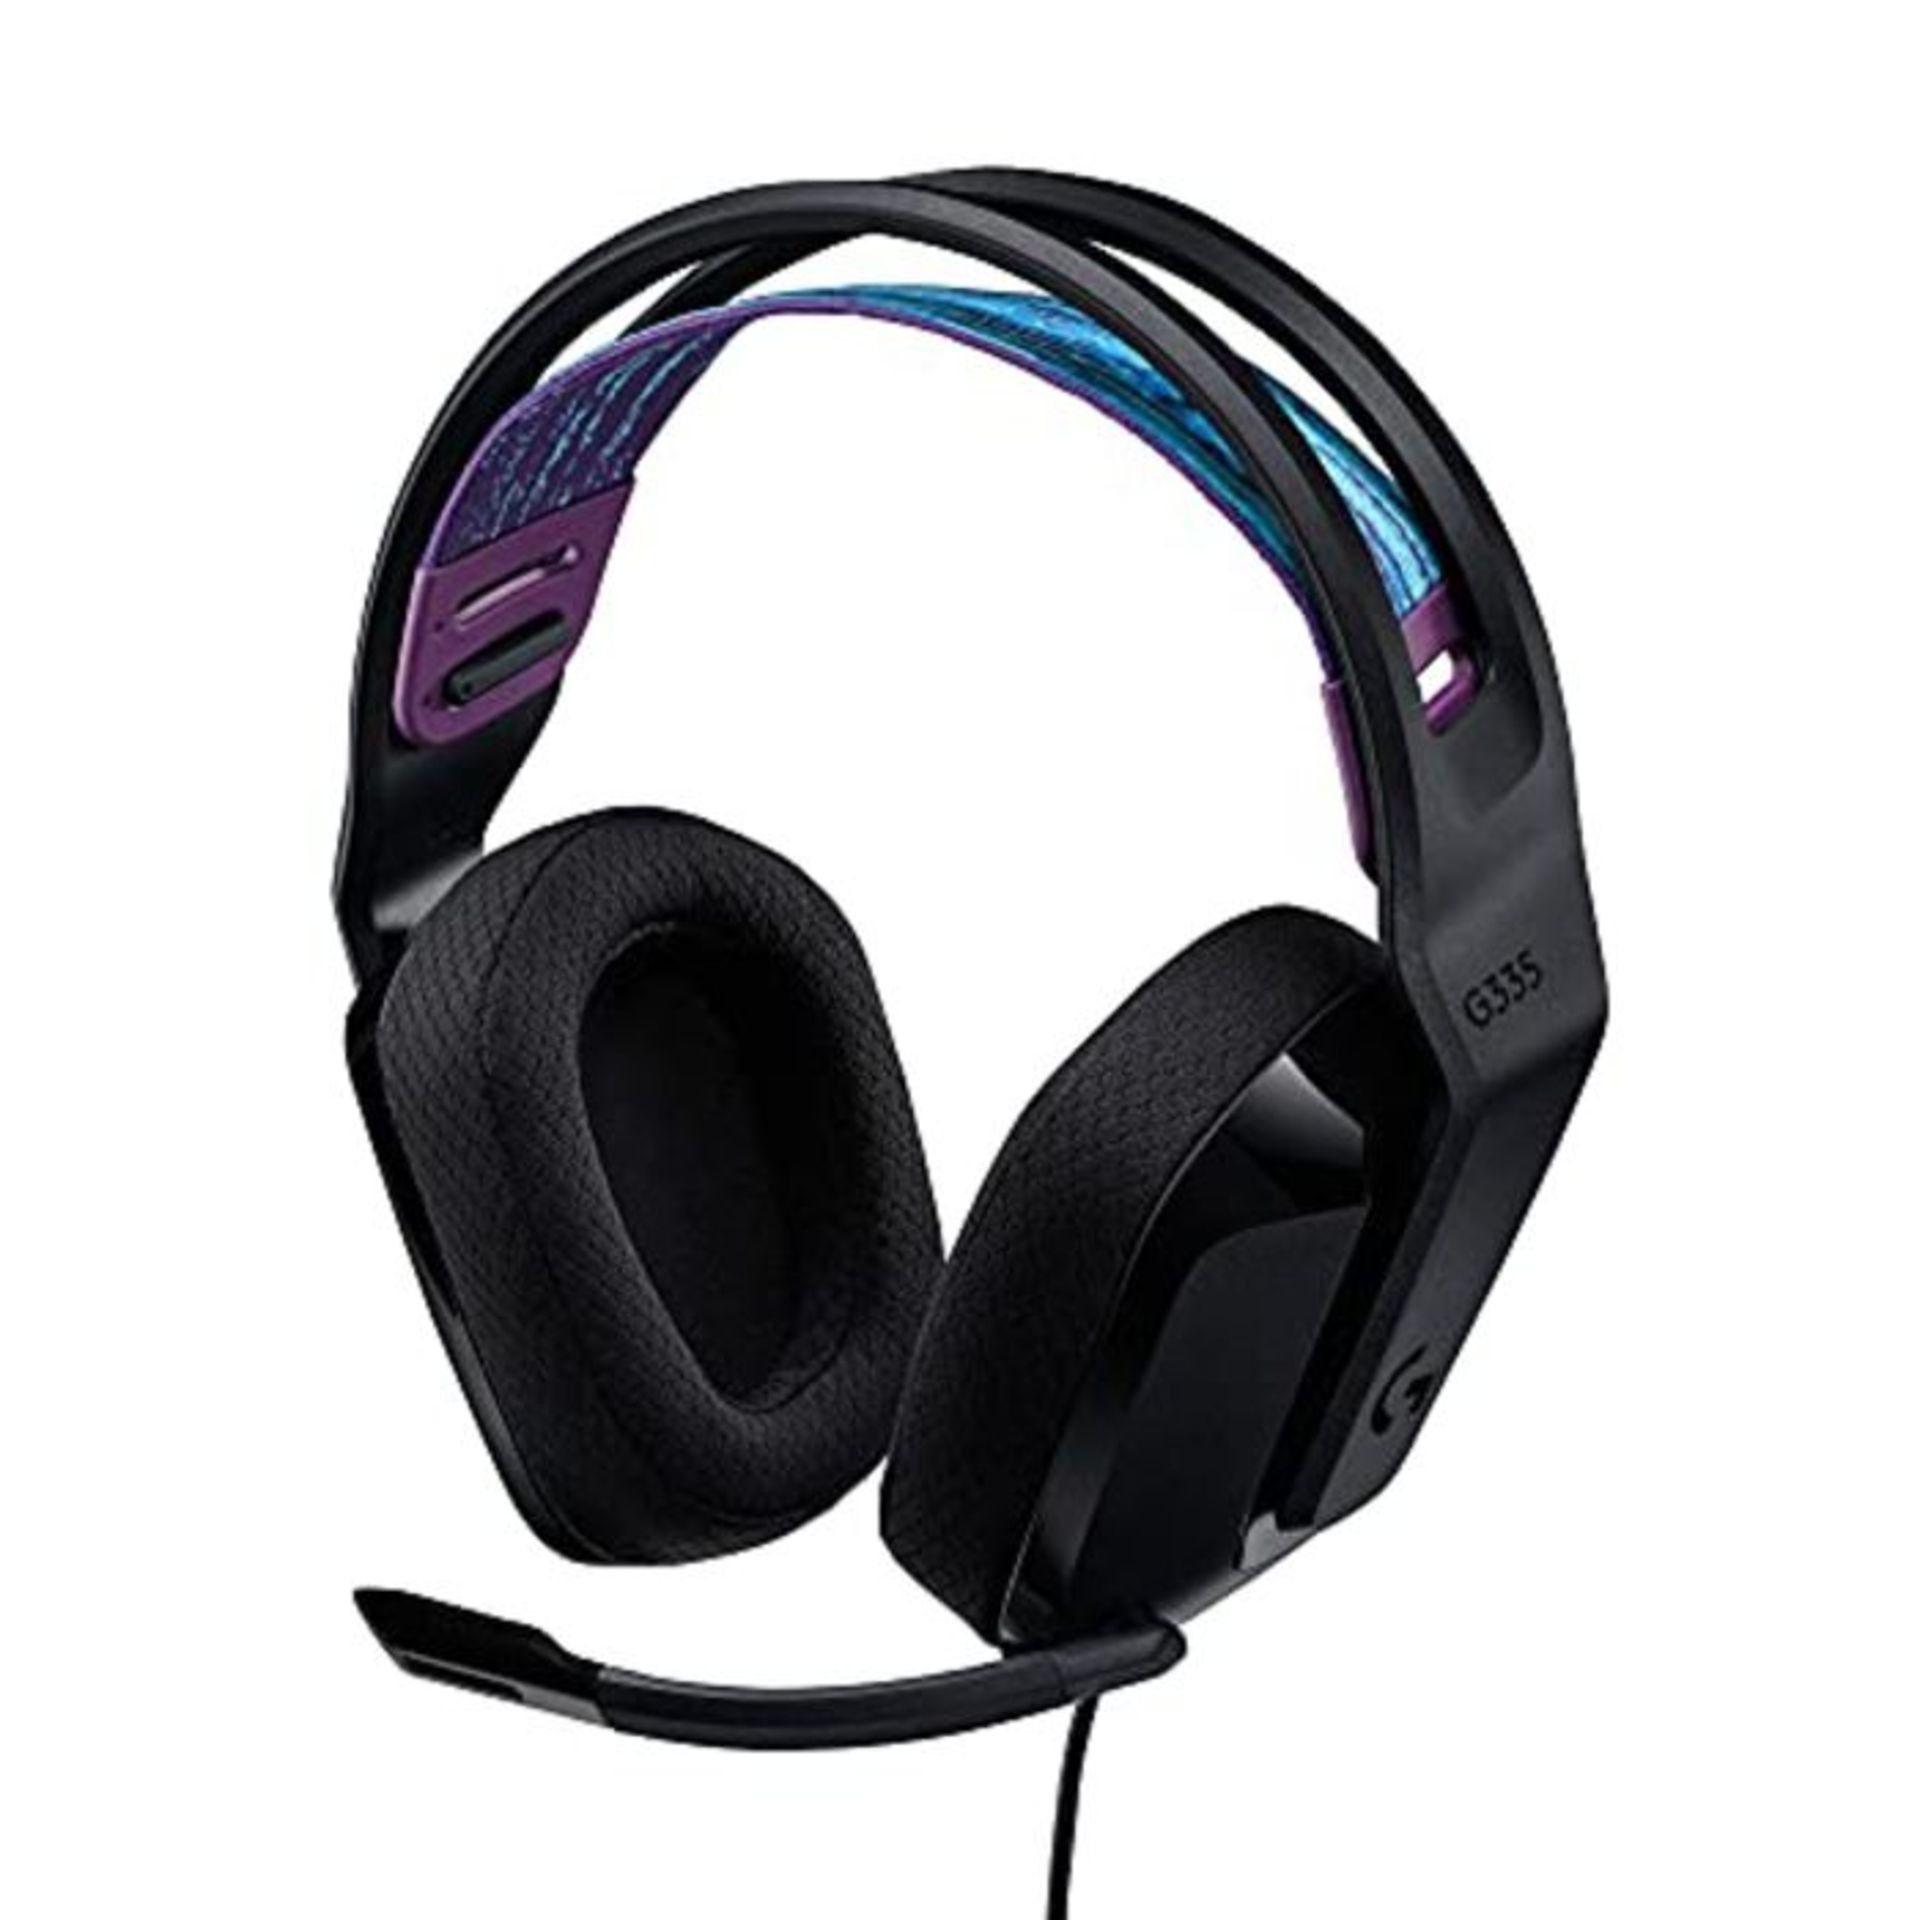 Logitech G335 Wired Gaming Headset, with Microphone, 3.5mm Audio Jack, Comfortable Mem